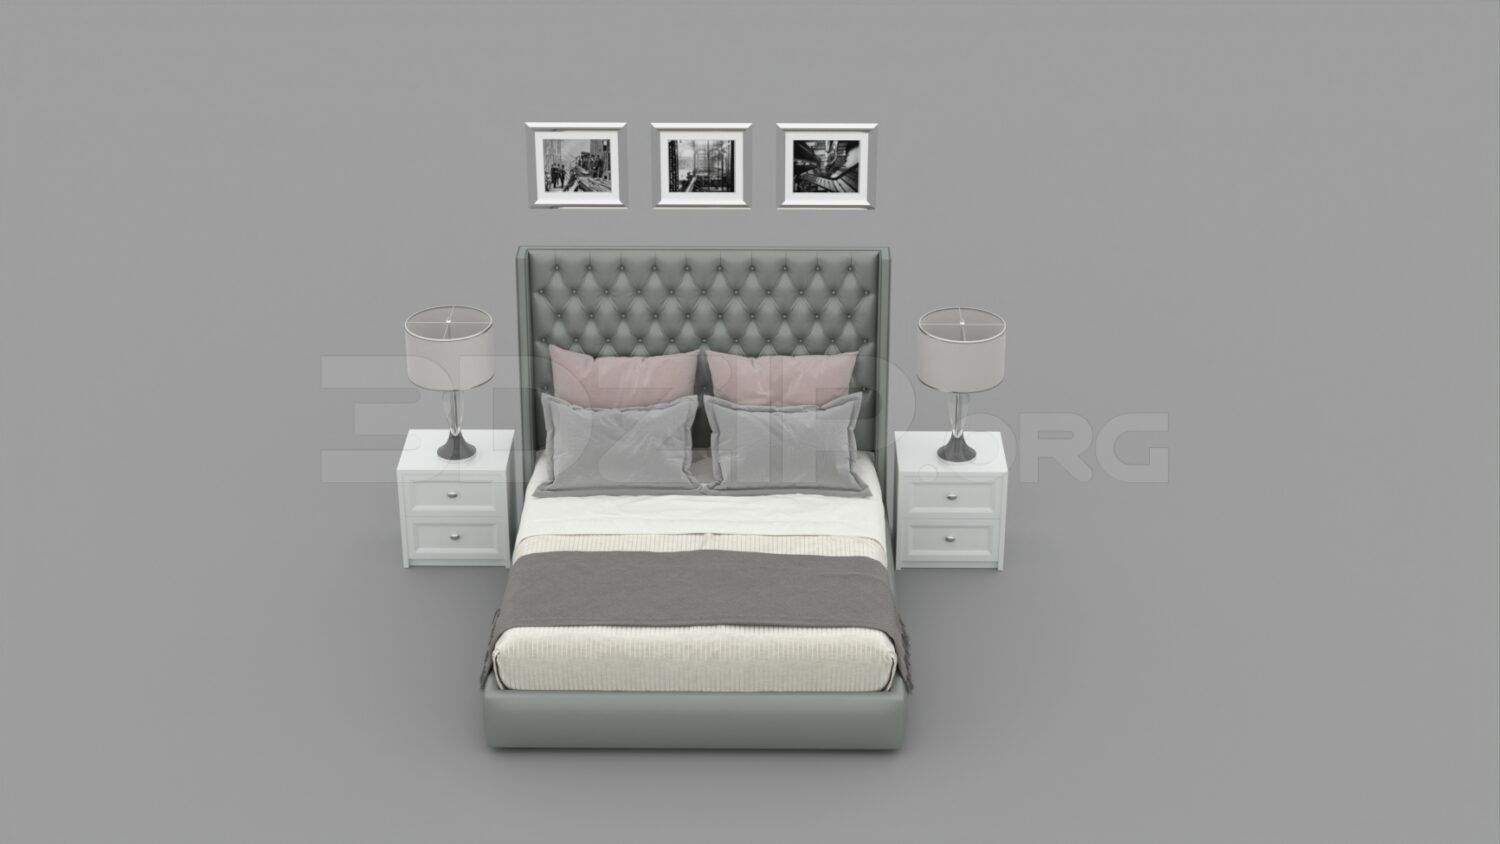 1796. Download Free Bed Model By Phan Thiet